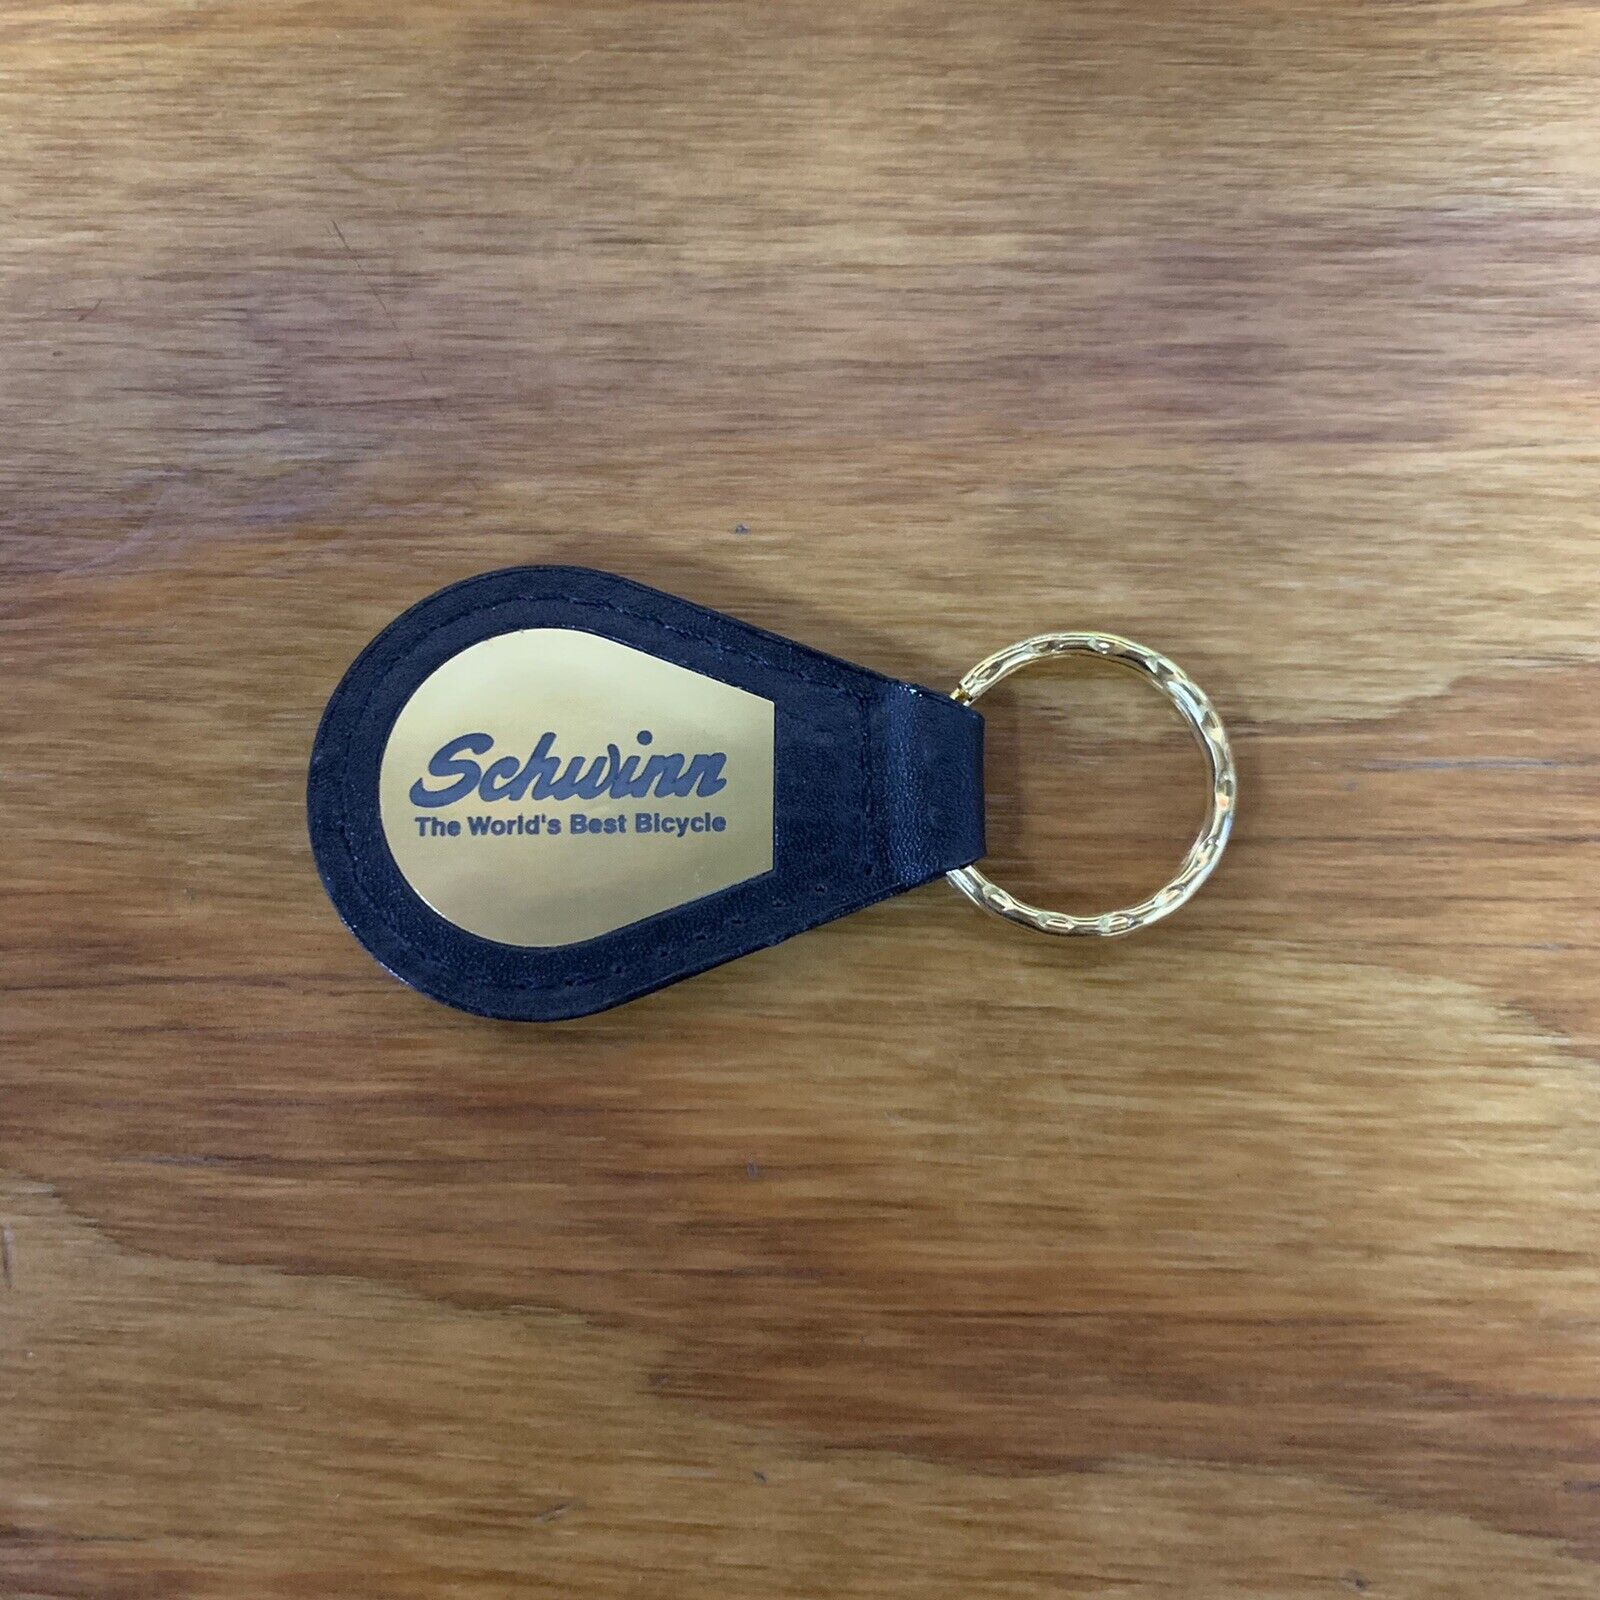 SCHWINN BICYCLE KEY CHAIN GOLD BLACK LEATHER THE WORLD\'S BEST BICYCLE NOS